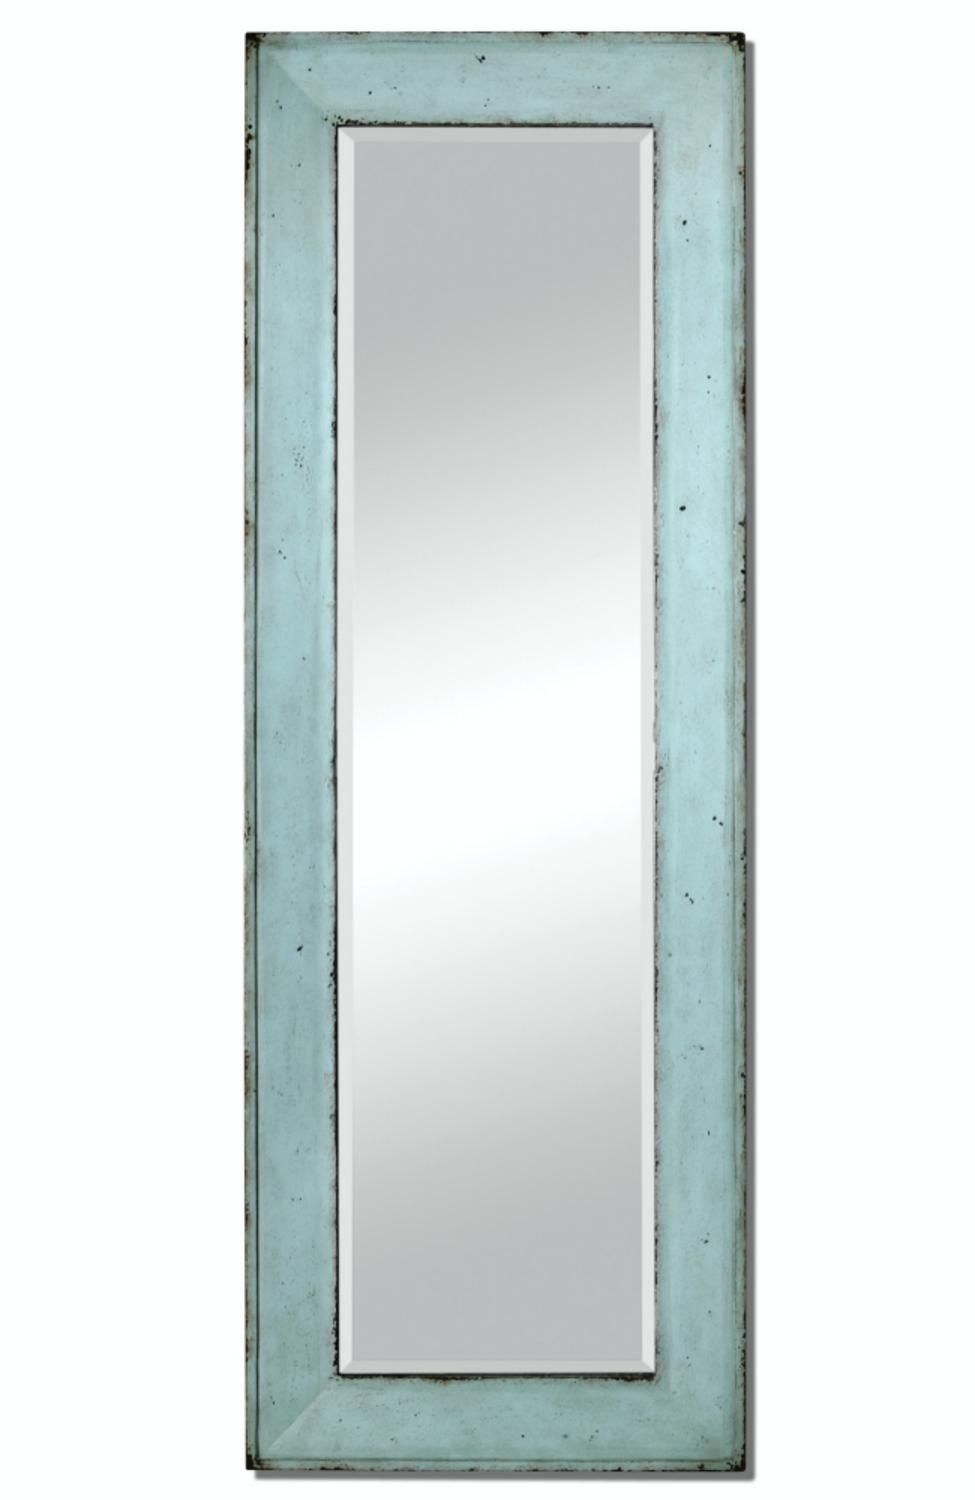 75" Beveled Rectangular Wall Mirror With Light Blue Distressed Pine Throughout Tropical Blue Wall Mirrors (View 6 of 15)